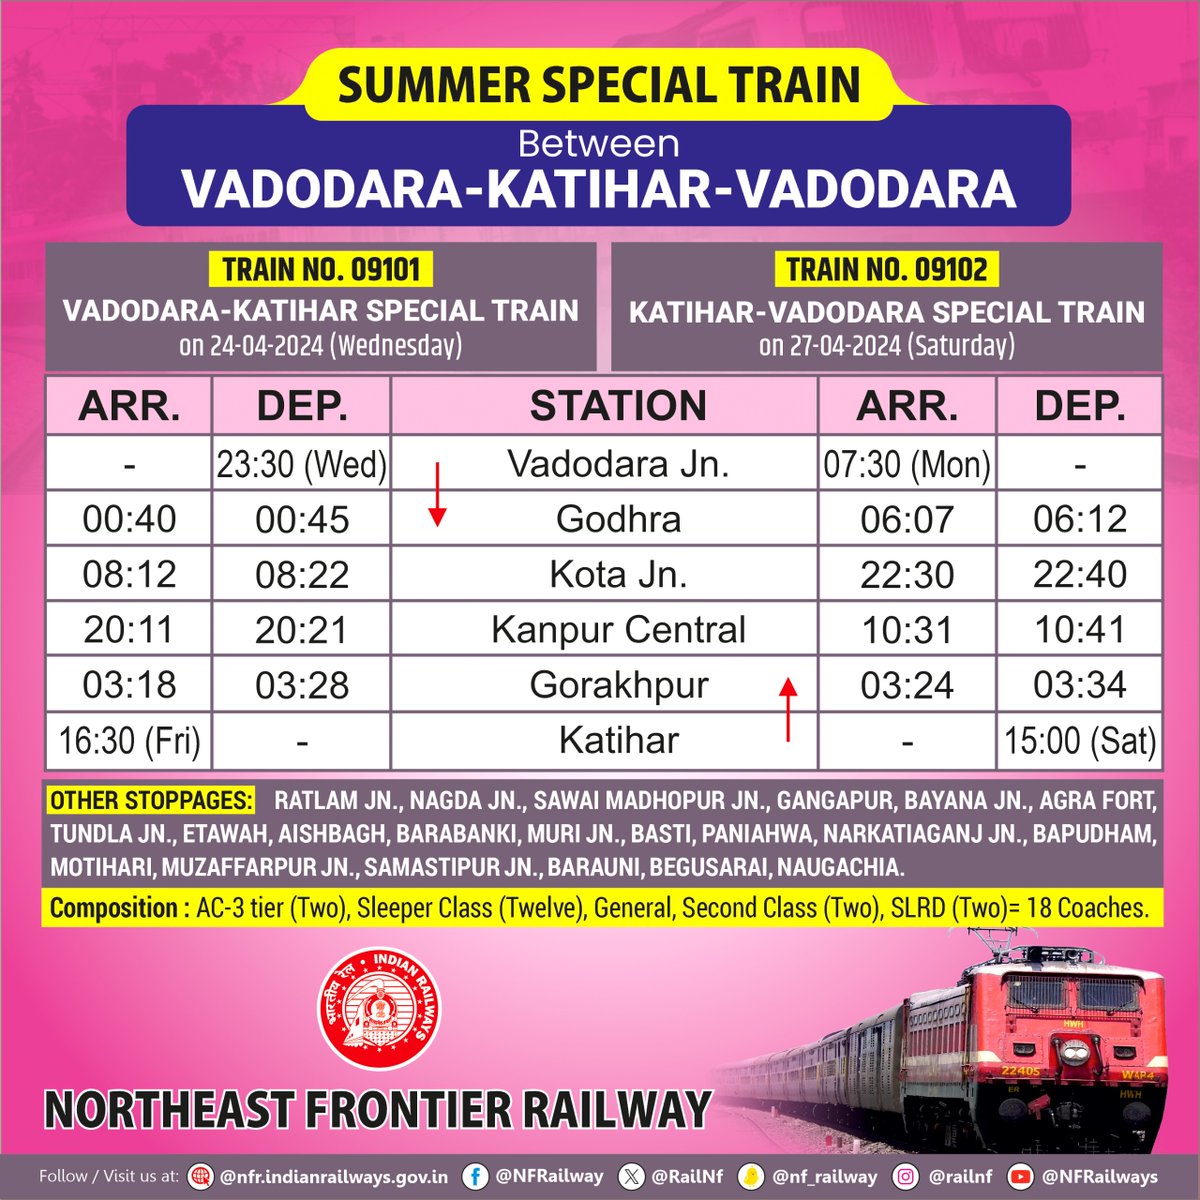 Summer special train between Katihar and Vadodara to clear the extra rush of passengers.